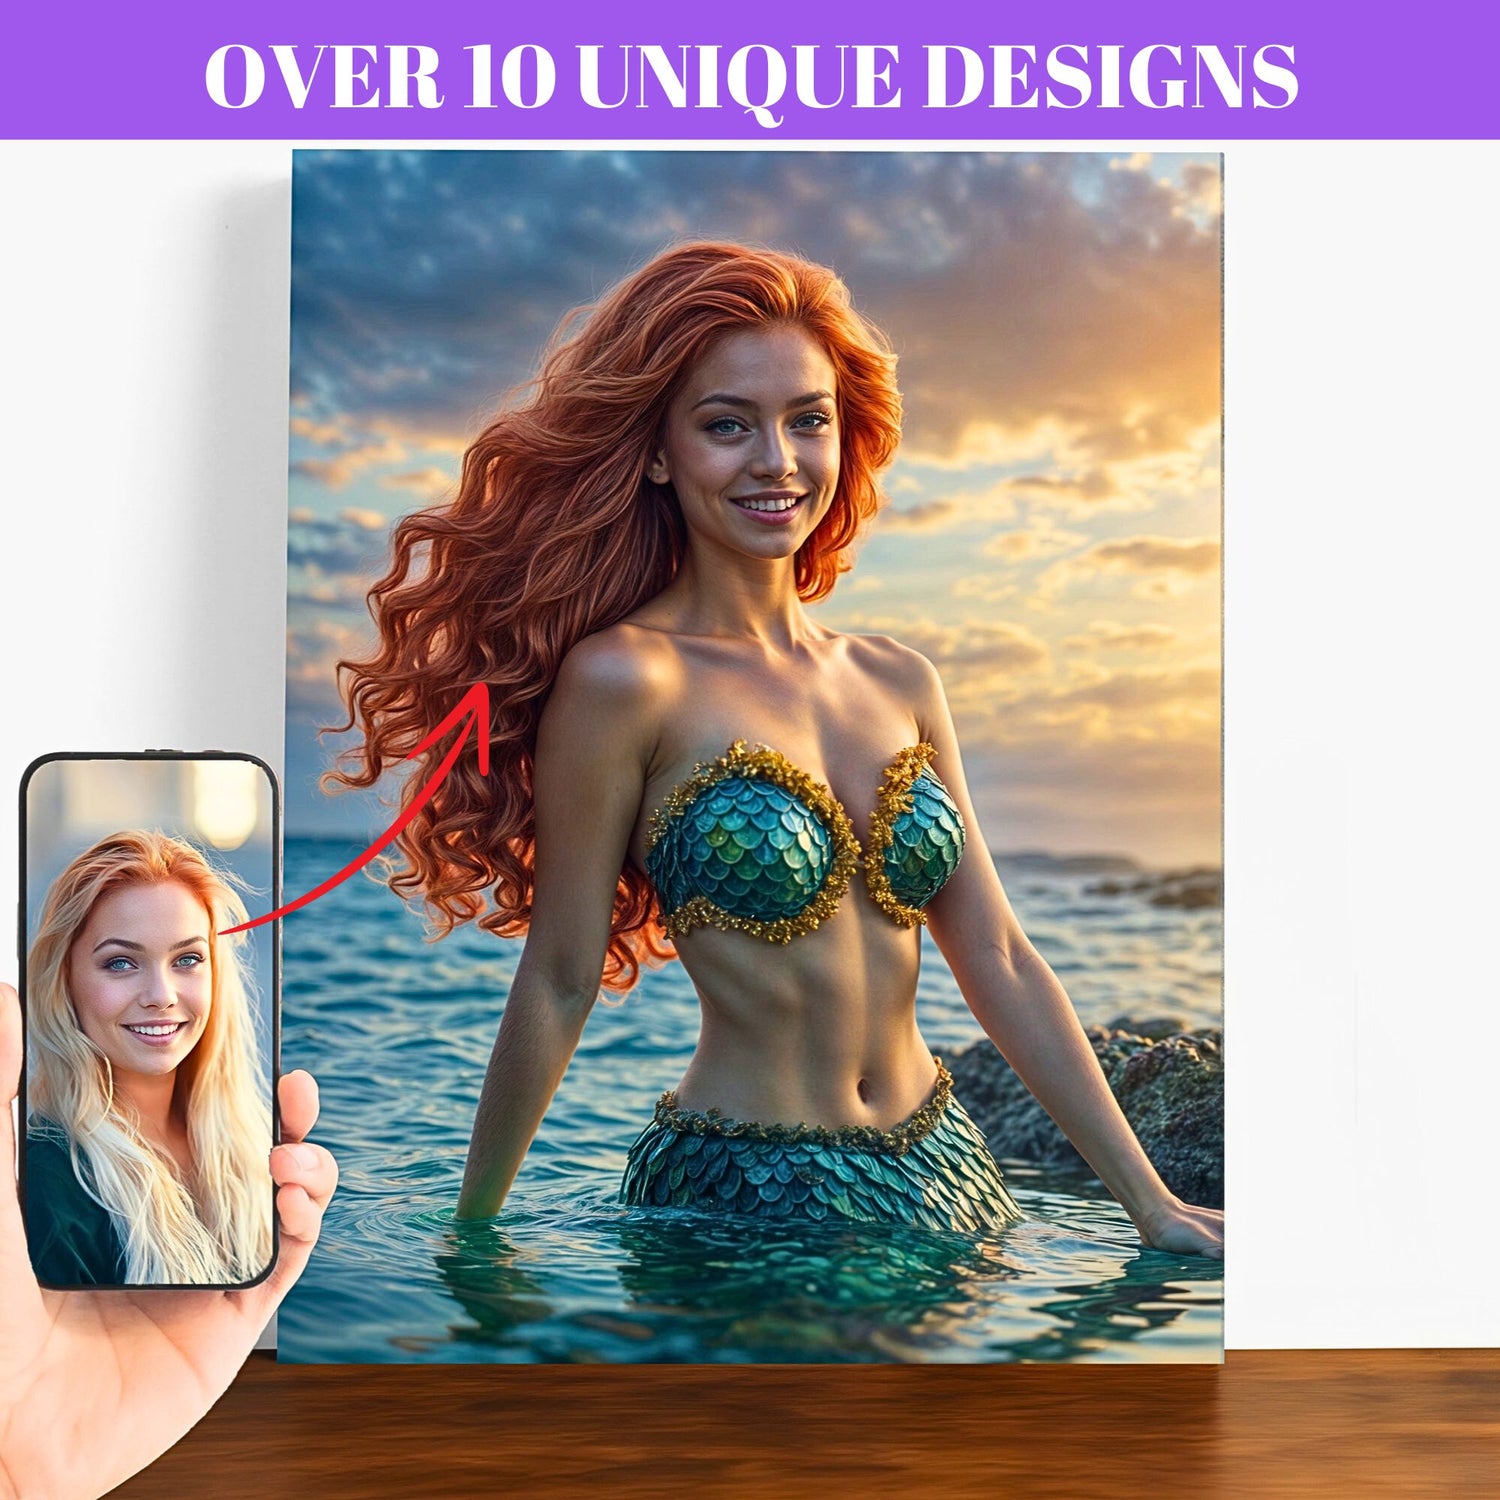 Custom Mermaid Portrait From Photo Personalized Princess Mermaid Portrait From Photo Wall Art Birthday gift for a woman Wall Art MT2.1